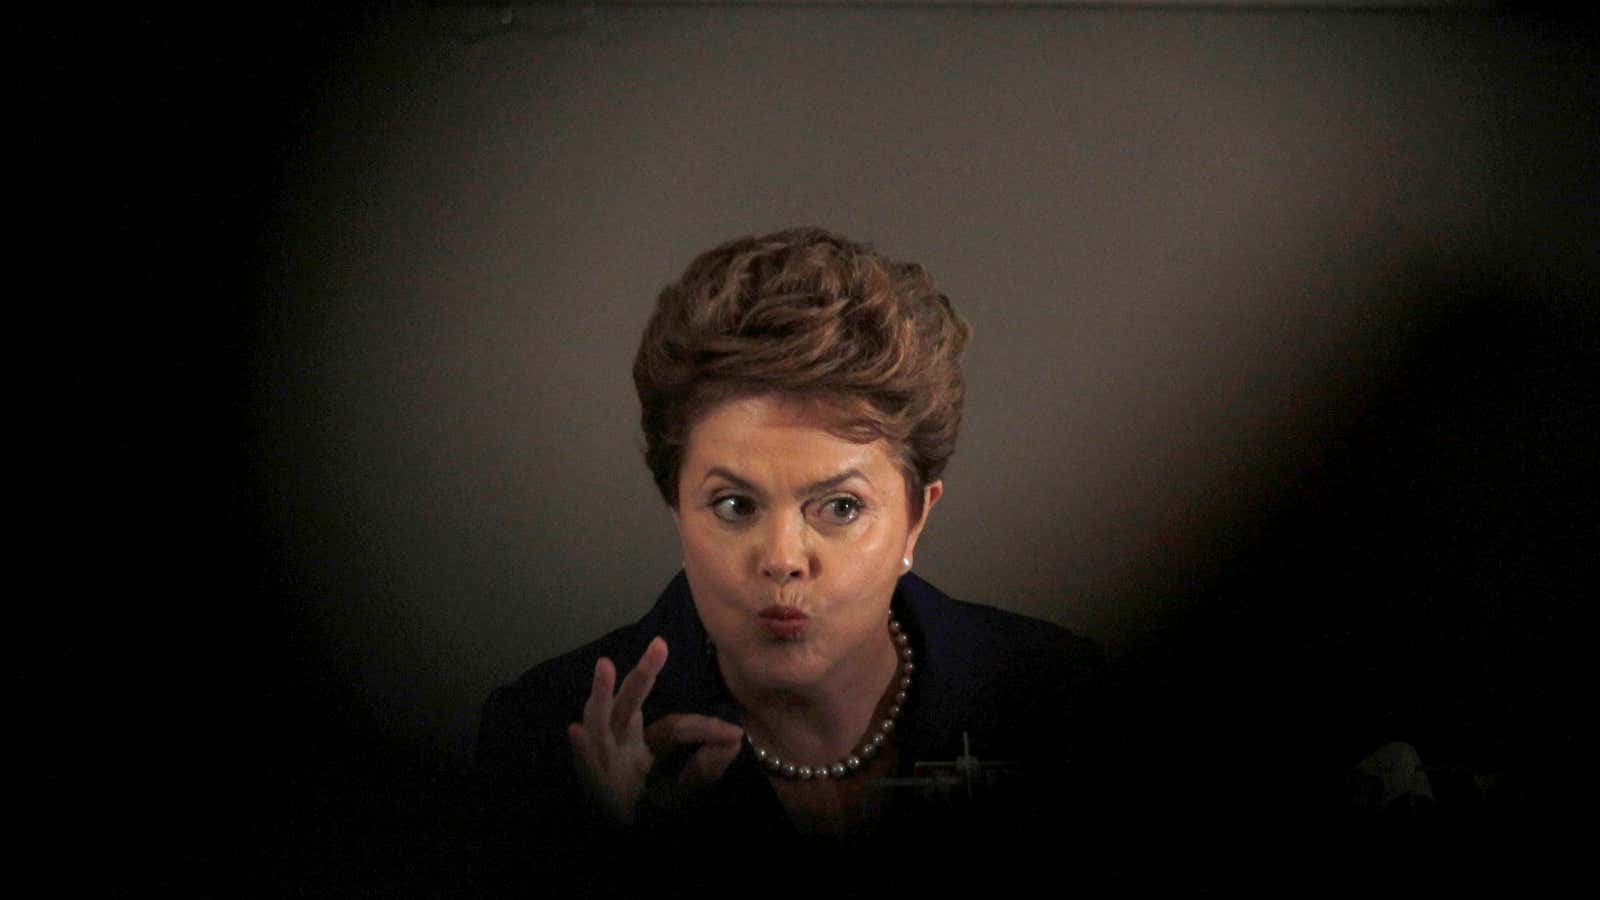 Dilma’s watching you.